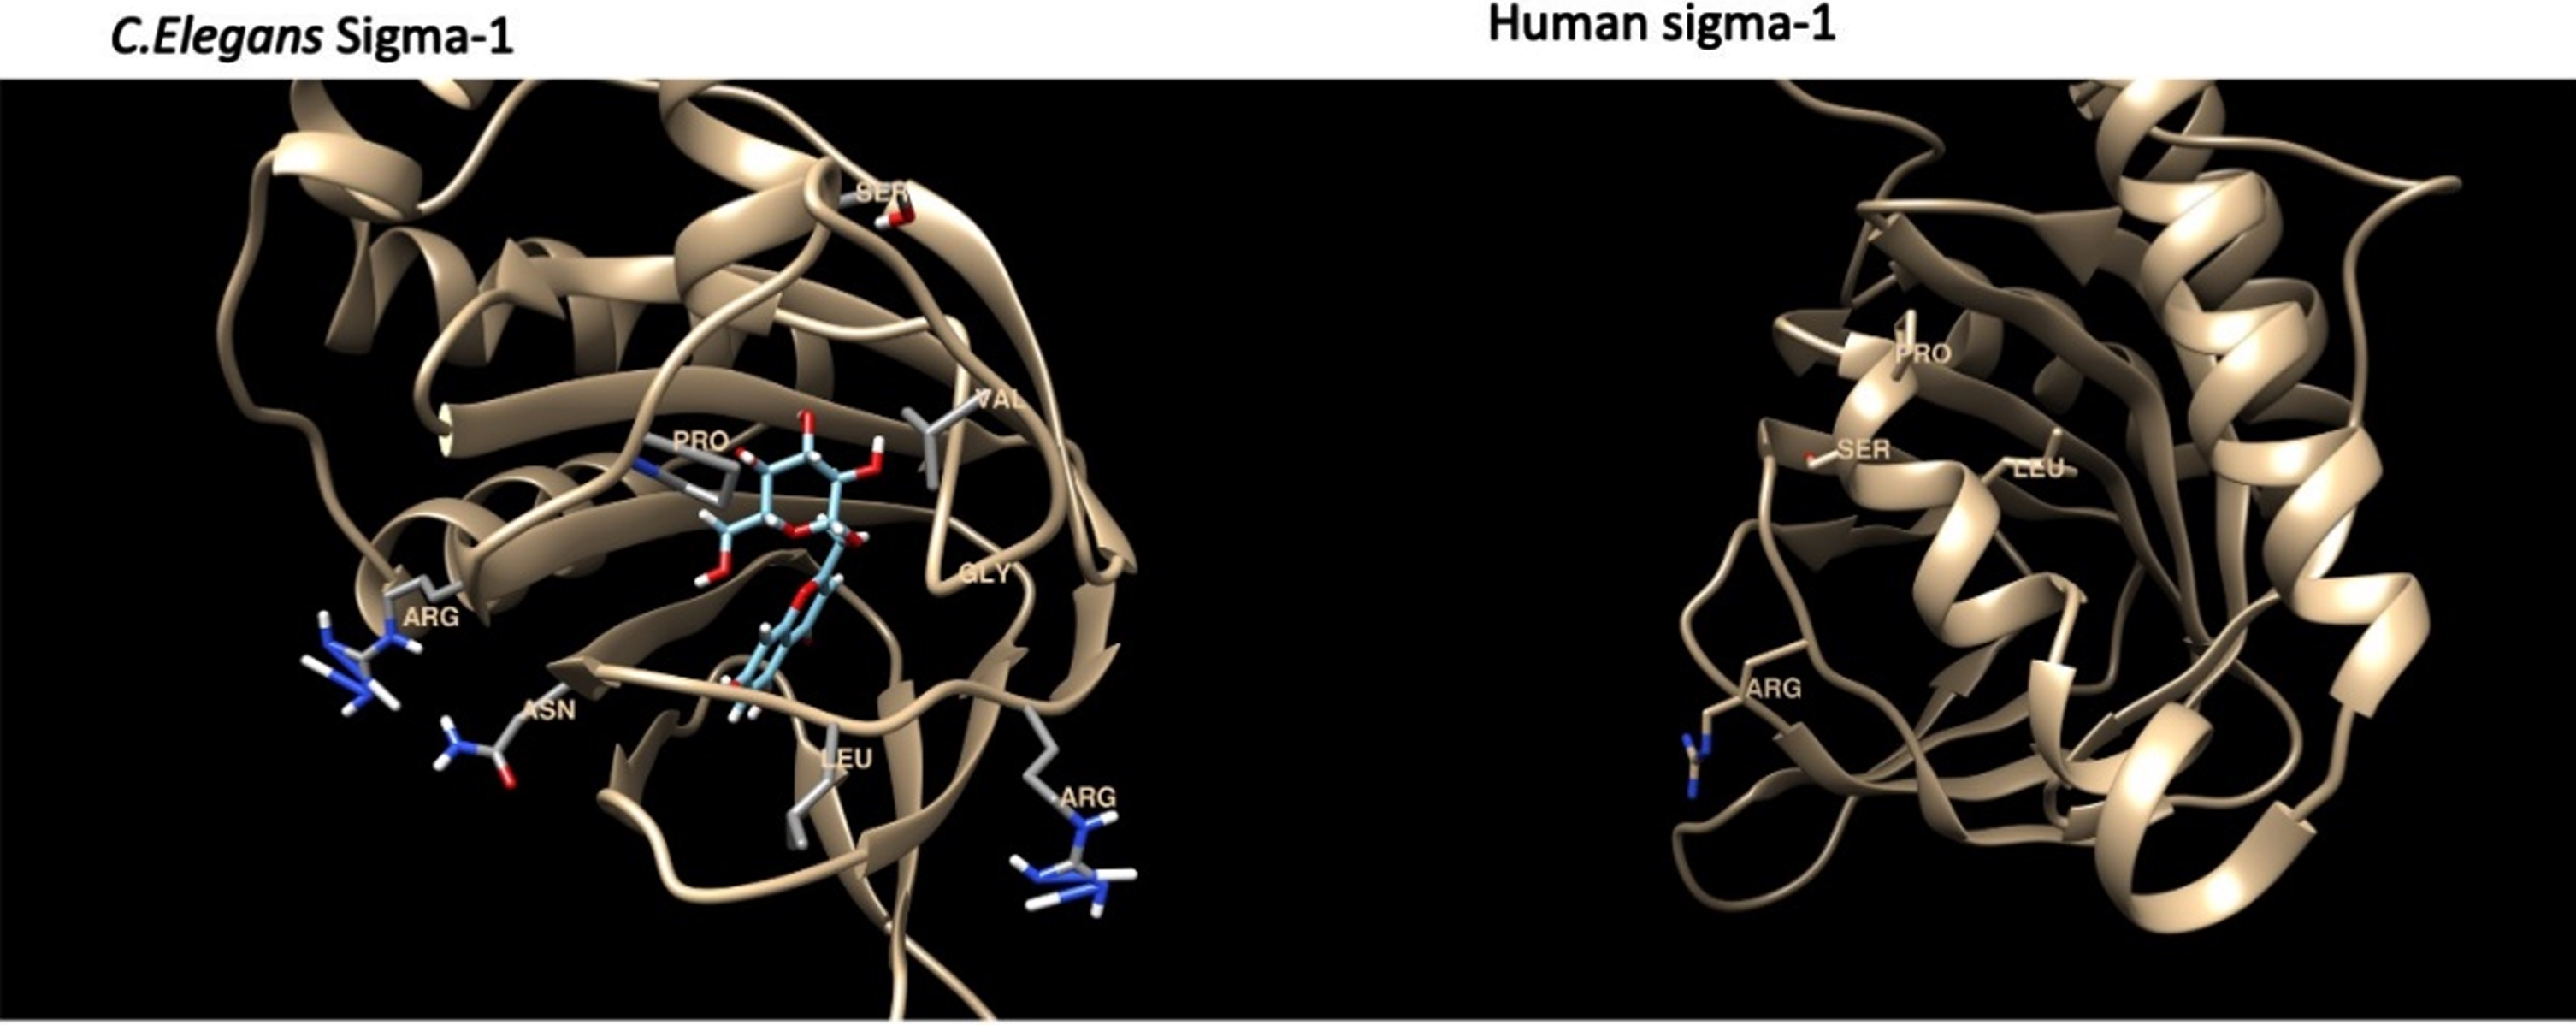 Model of the sigma-1 receptor from both C. elegnans and humans showing the binding pocket and interacting amino acids.